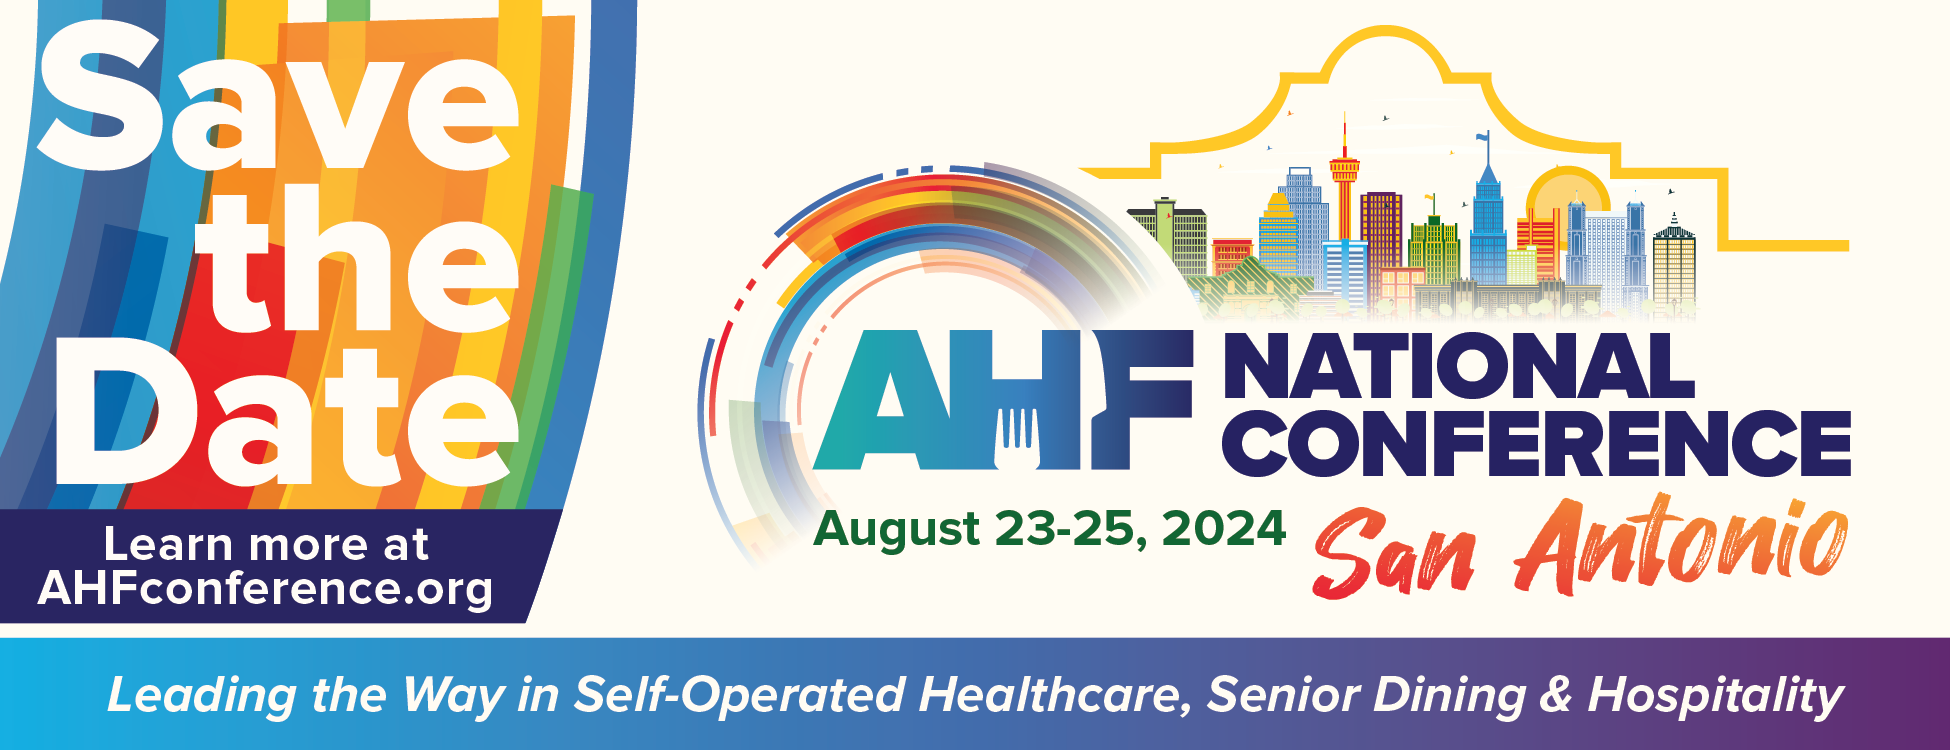 AHF National Conference. August 23-25, 2024. San Antonio, TX. Save the date. Learn more.